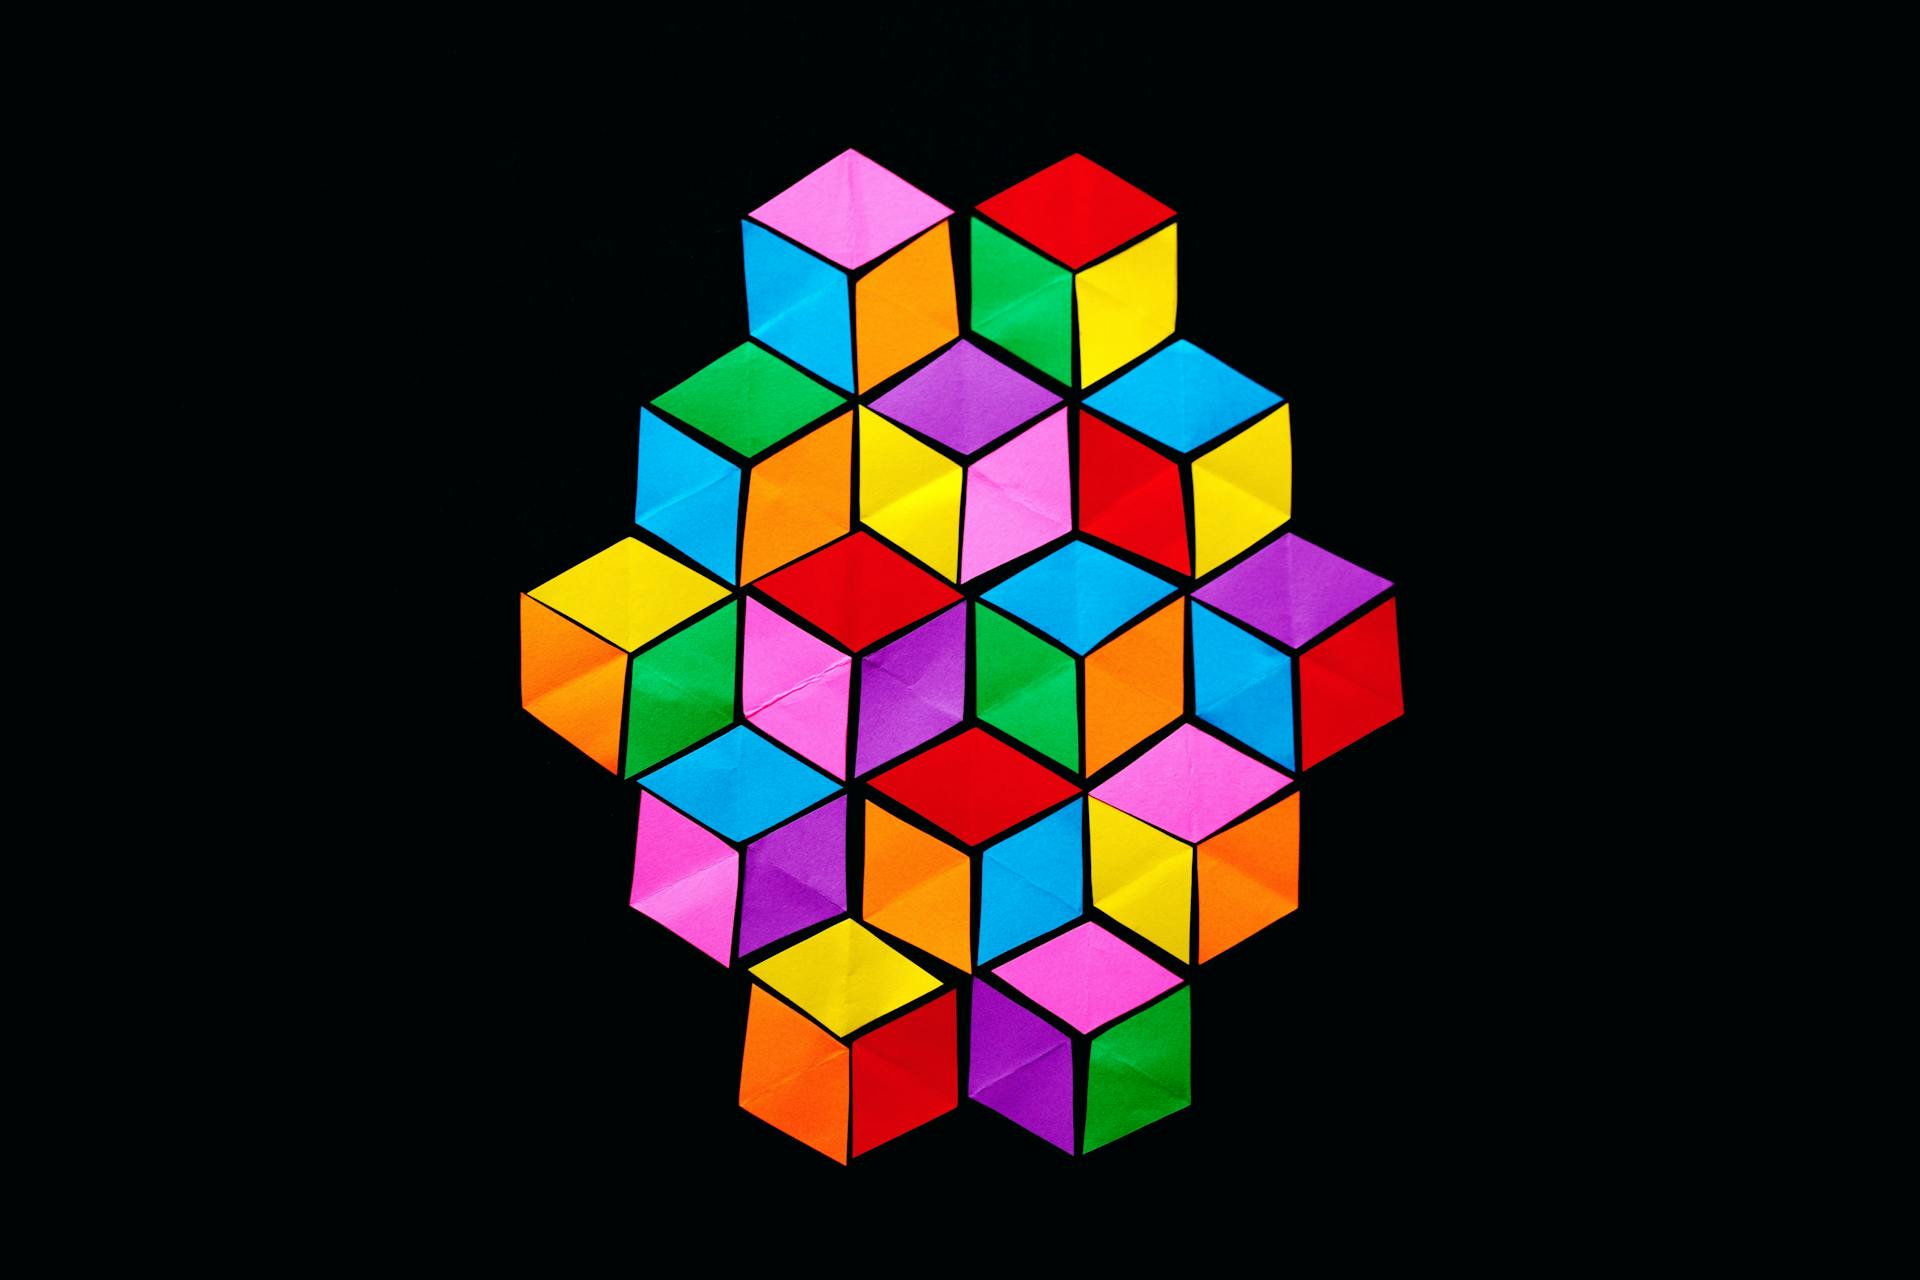 Multiple multi-coloured cubes arranged in a pattern.